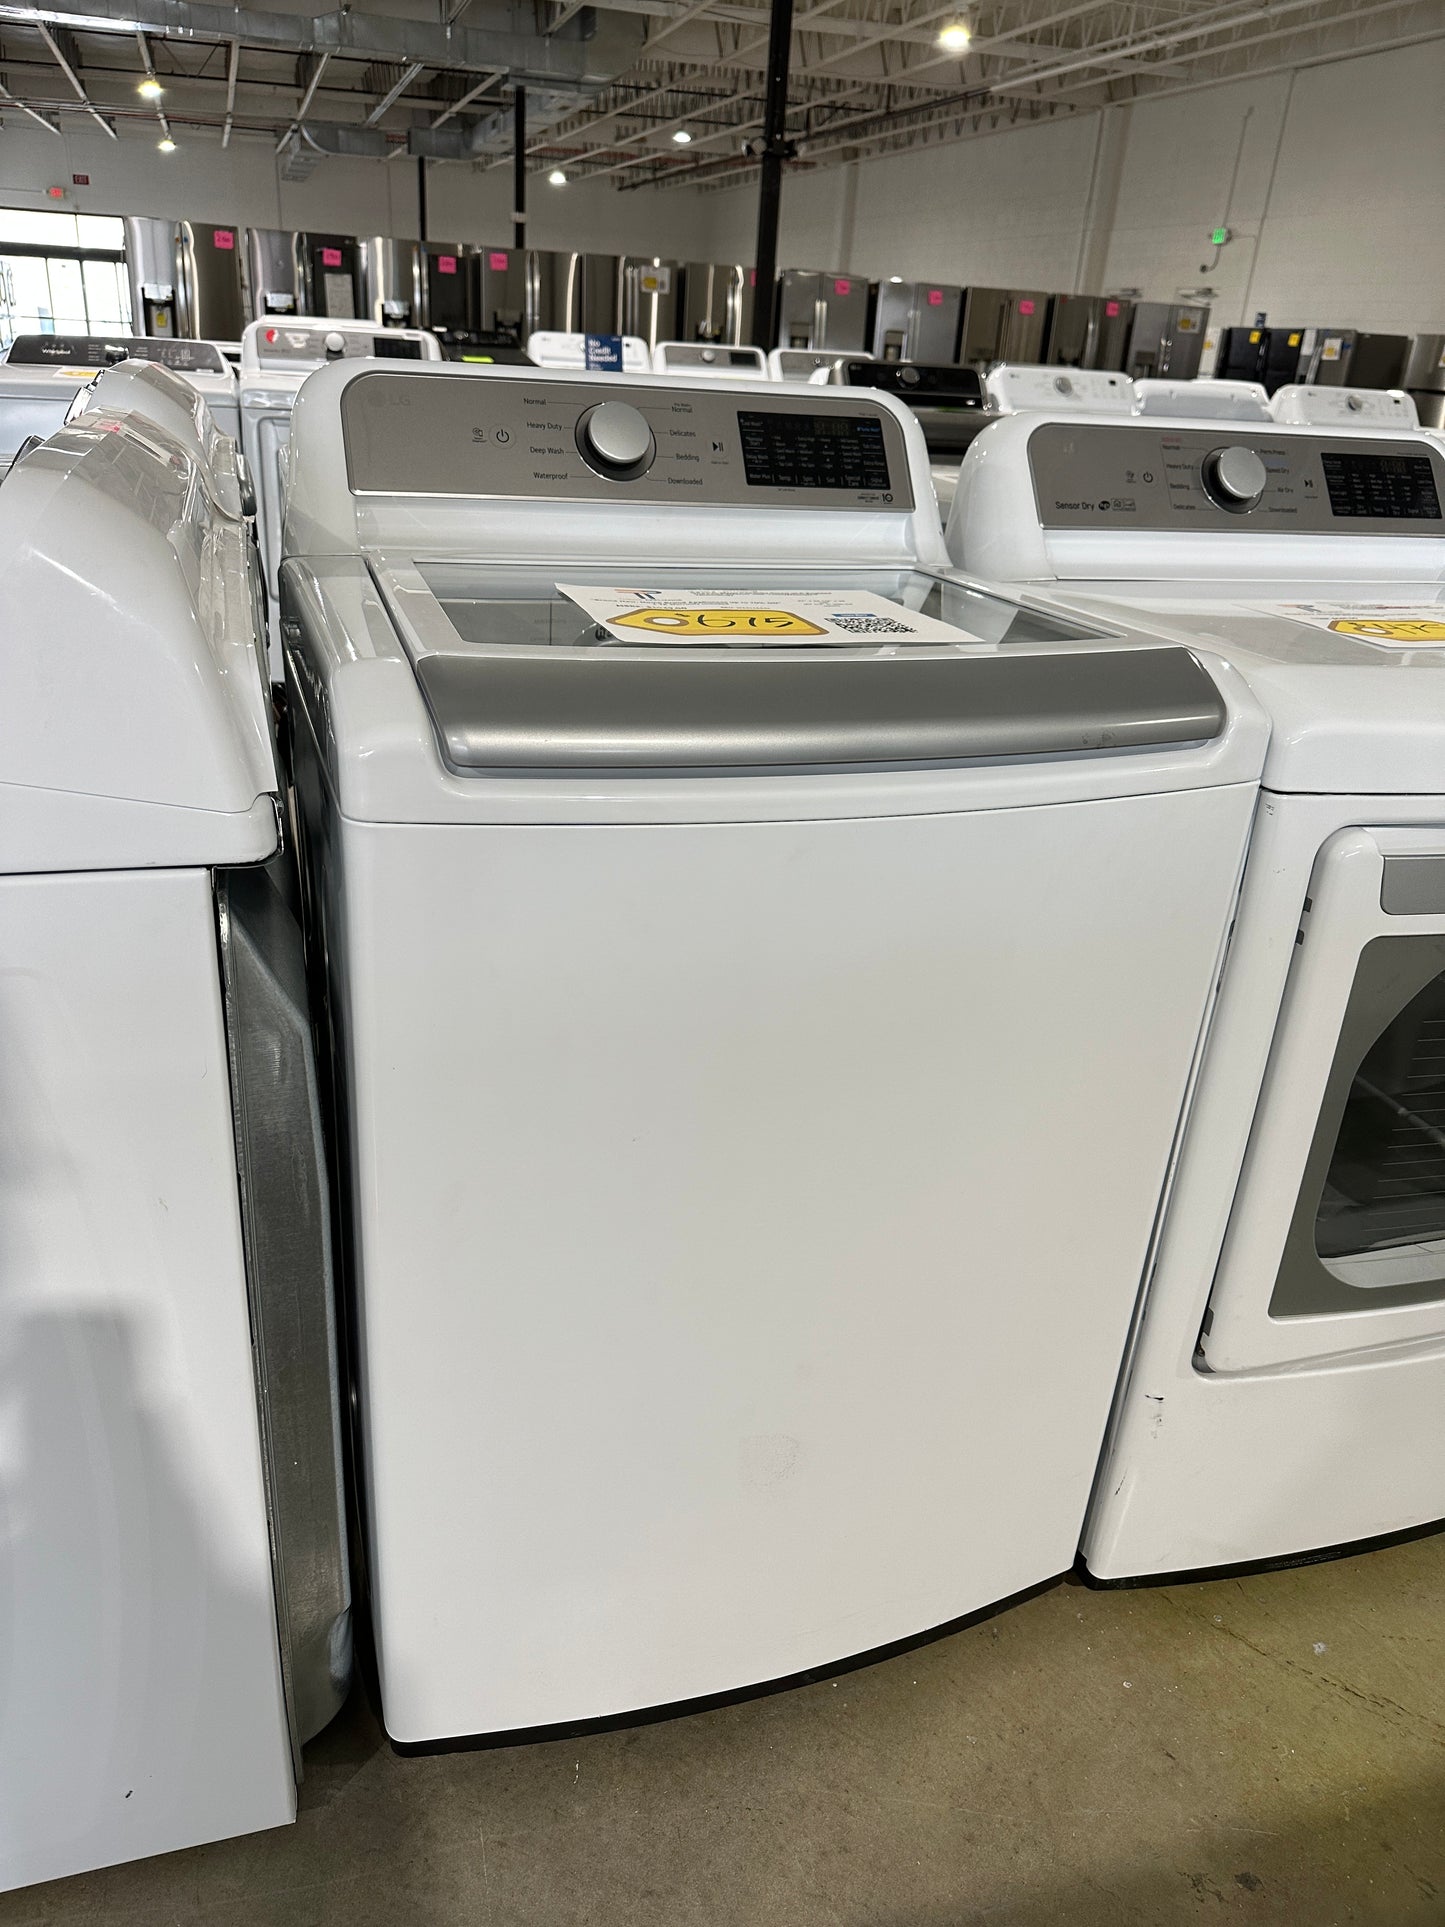 GORGEOUS NEW TOP LOAD LG WASHER - WAS11844S WT7400CW